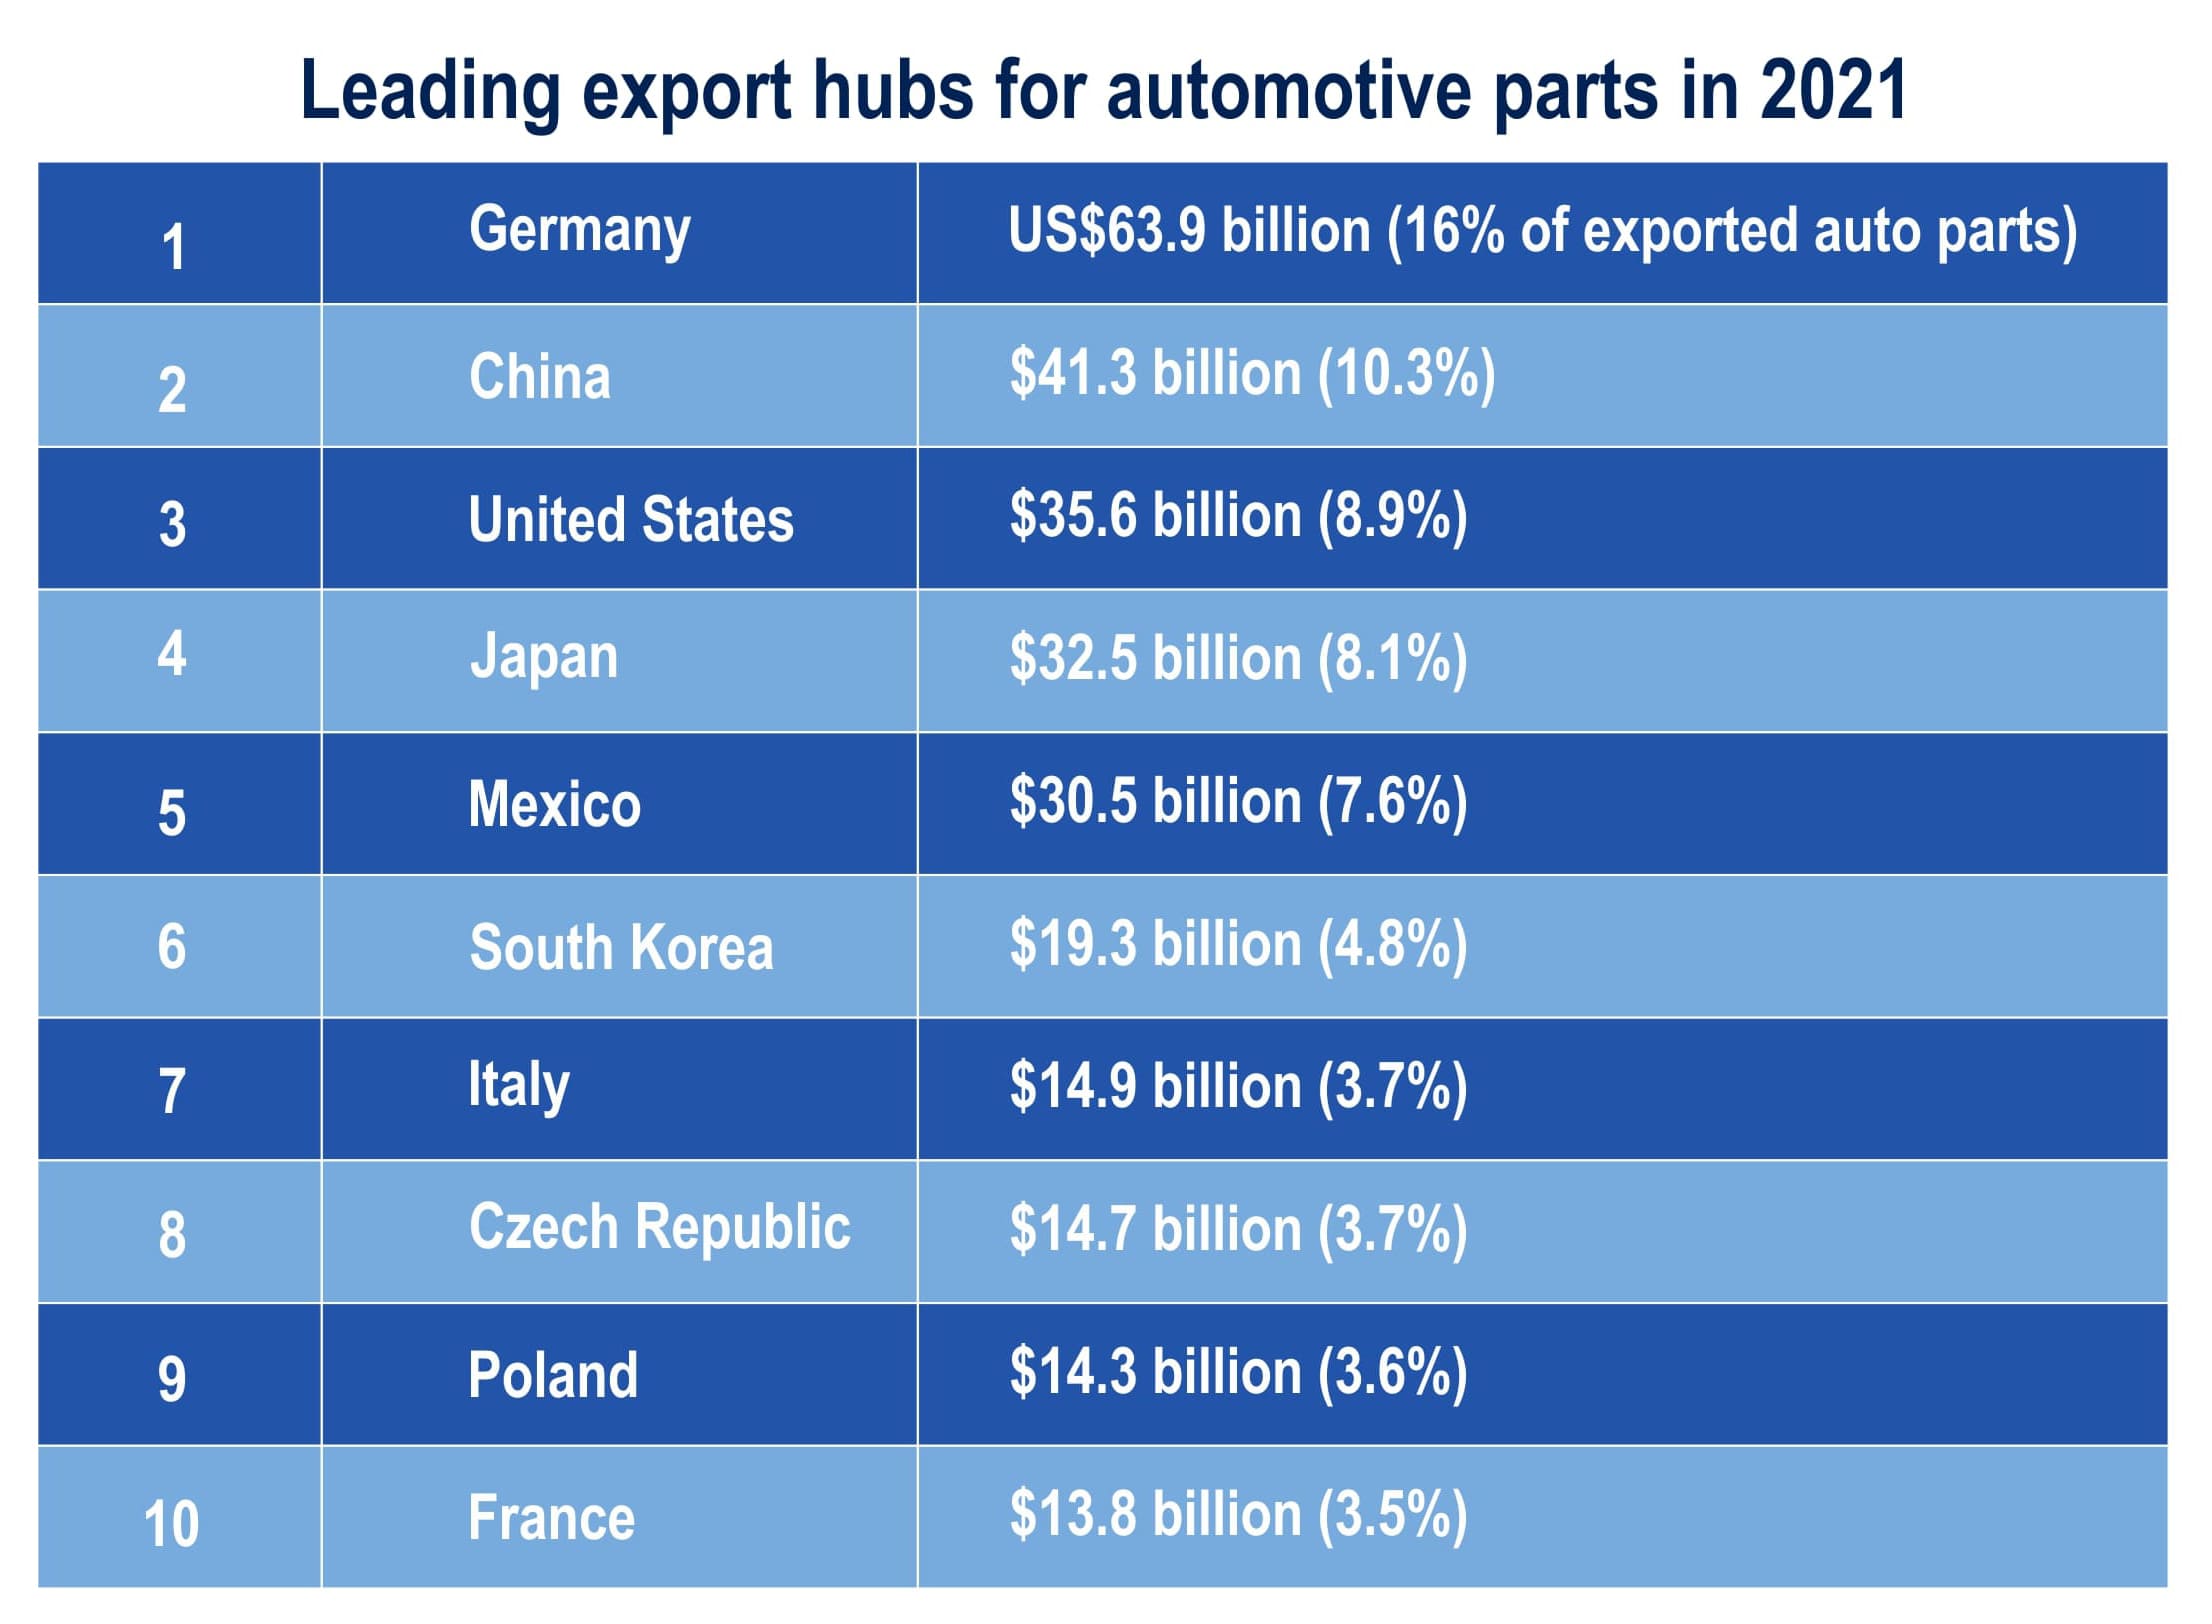 UJA leading export hubs for automotive pats in 2021